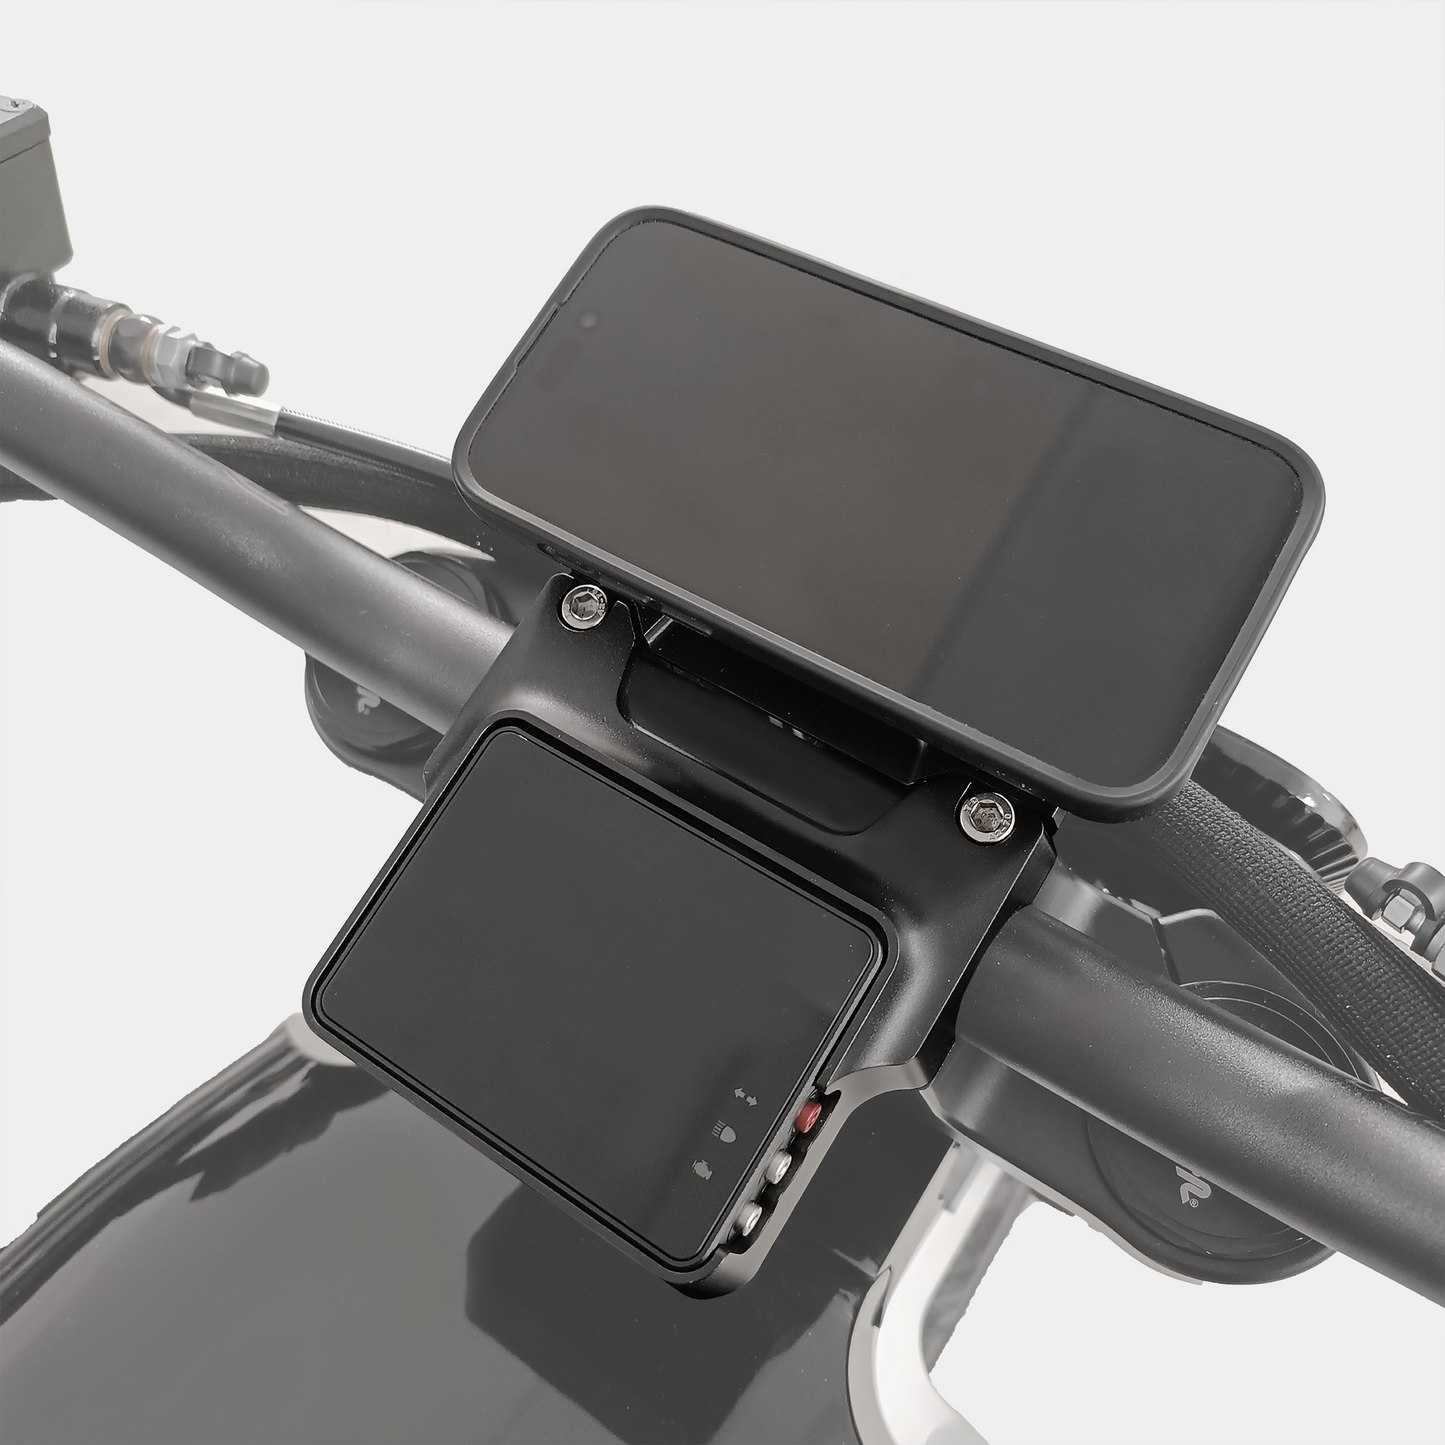 DAB x Quad Lock charger and phone mount